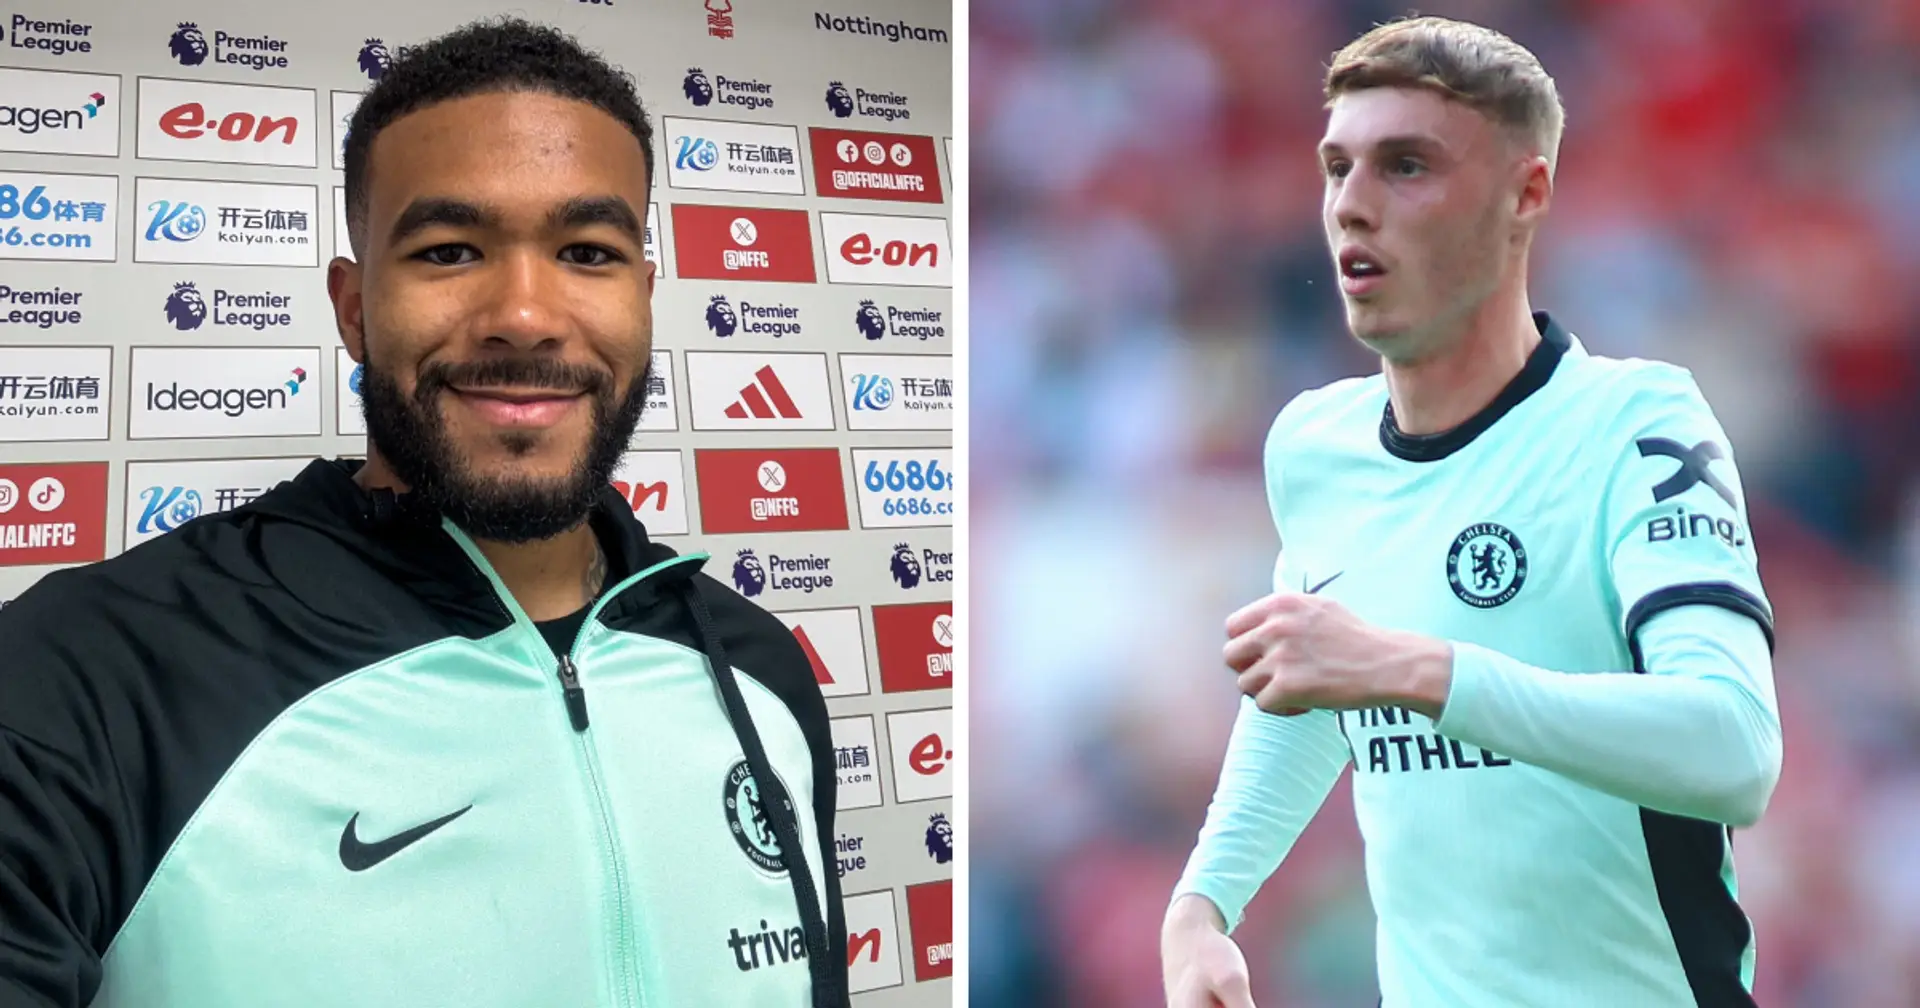 'I wouldn't go that far': Cole Palmer disagrees with huge Reece James' claim about him